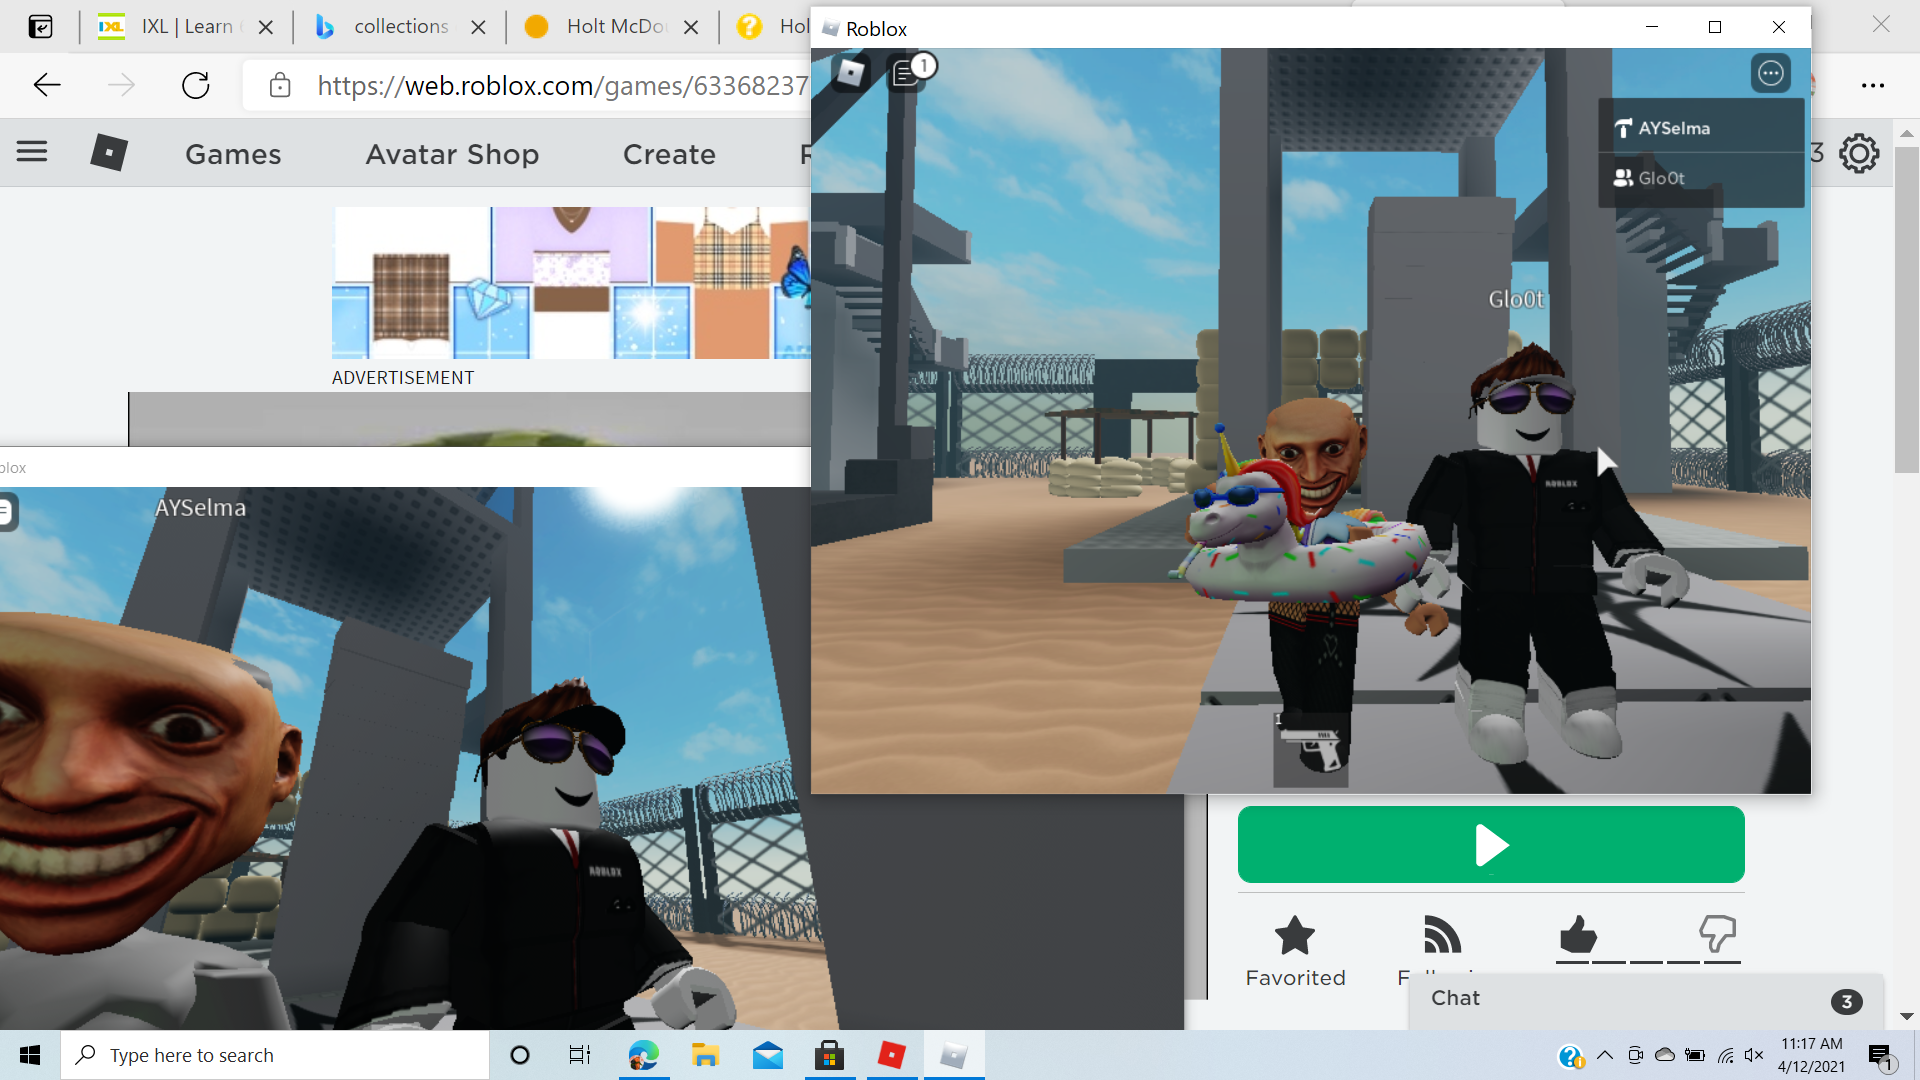 Yasss I Finally Found Out How To Play With 2 Roblox Accounts On My Computer At The Same Time Ddddd Fandom - robloxhttps web roblox com games